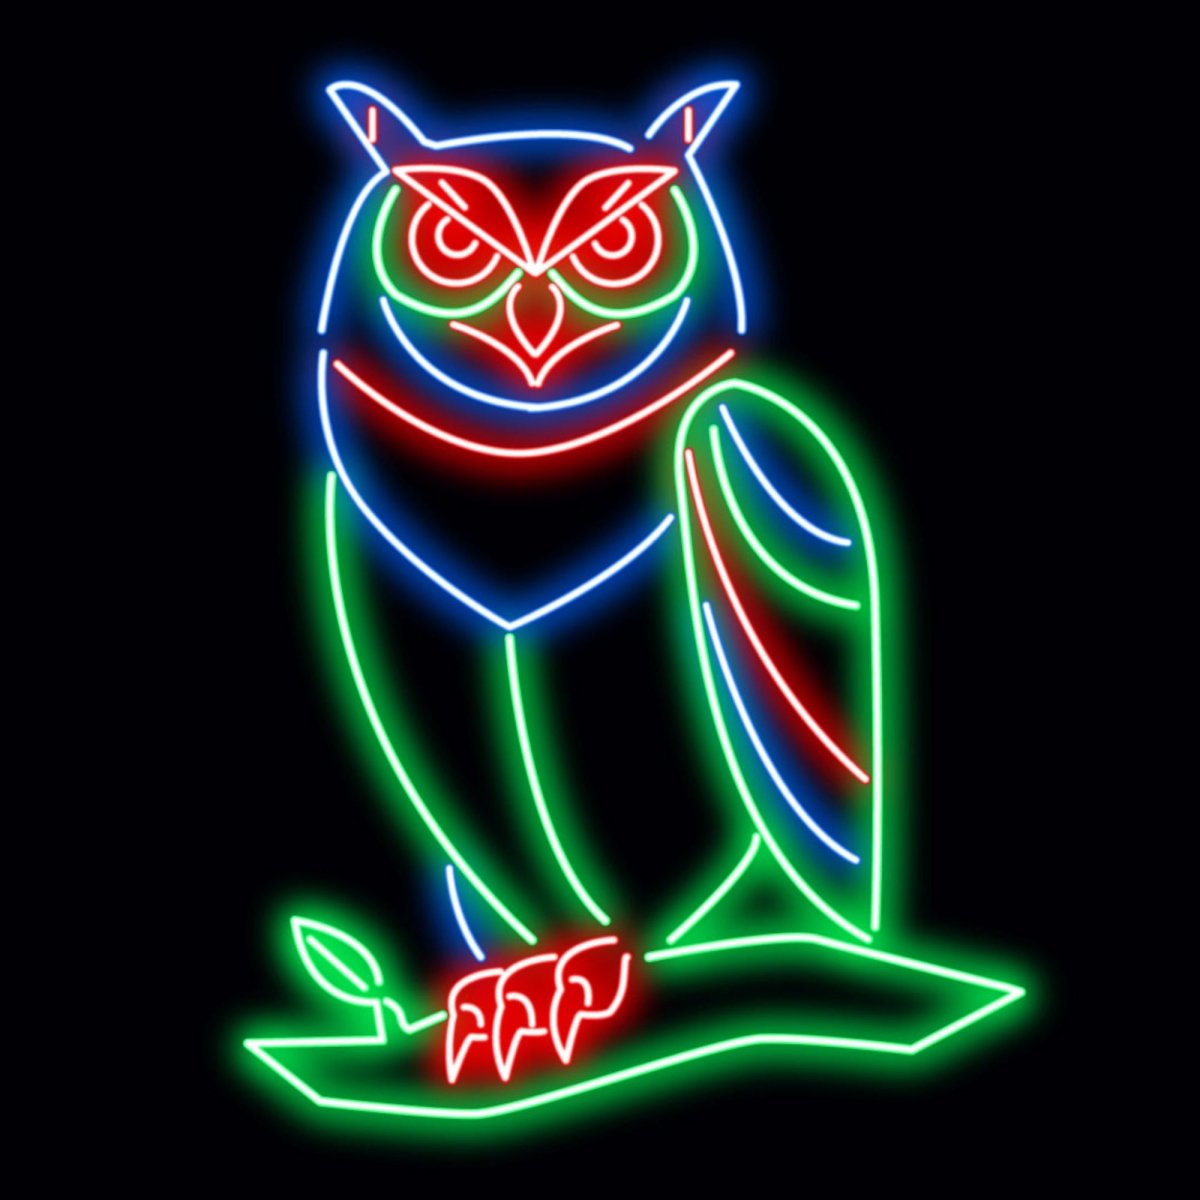 Personalised LED Neon Sign OWL 1 - madaboutneon